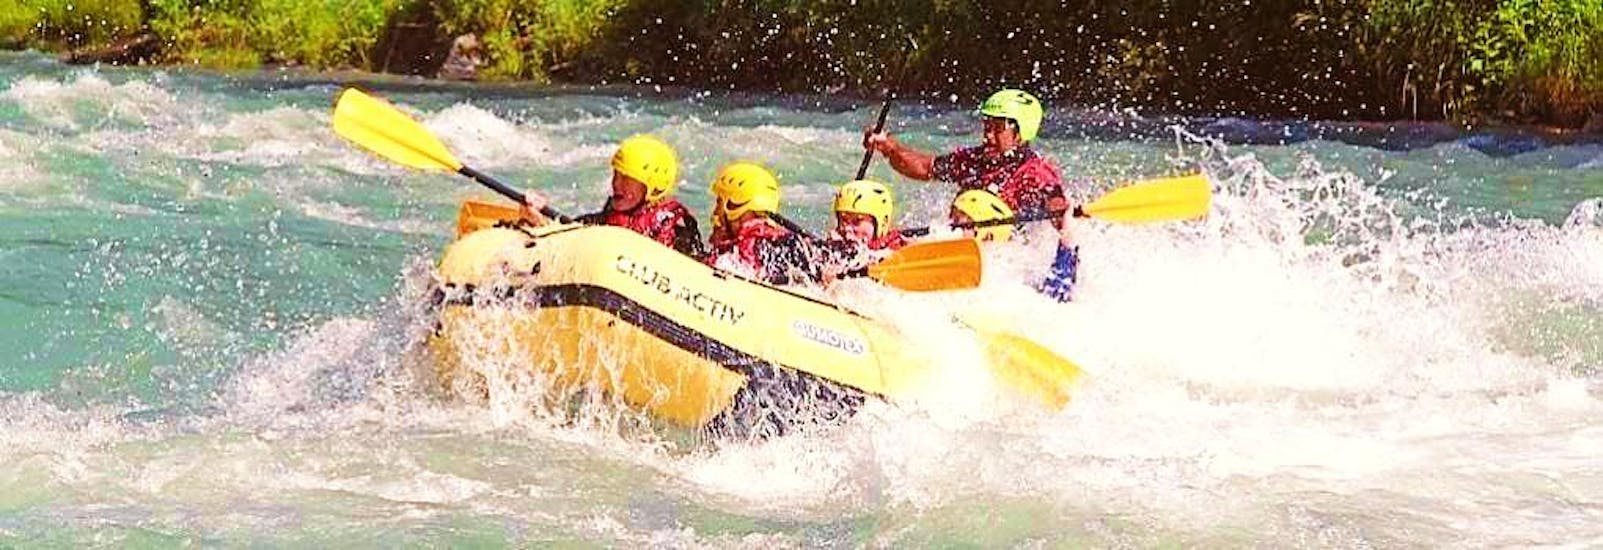 A group during their Rafting tour on the Ahre with Club Active Campo Tures.